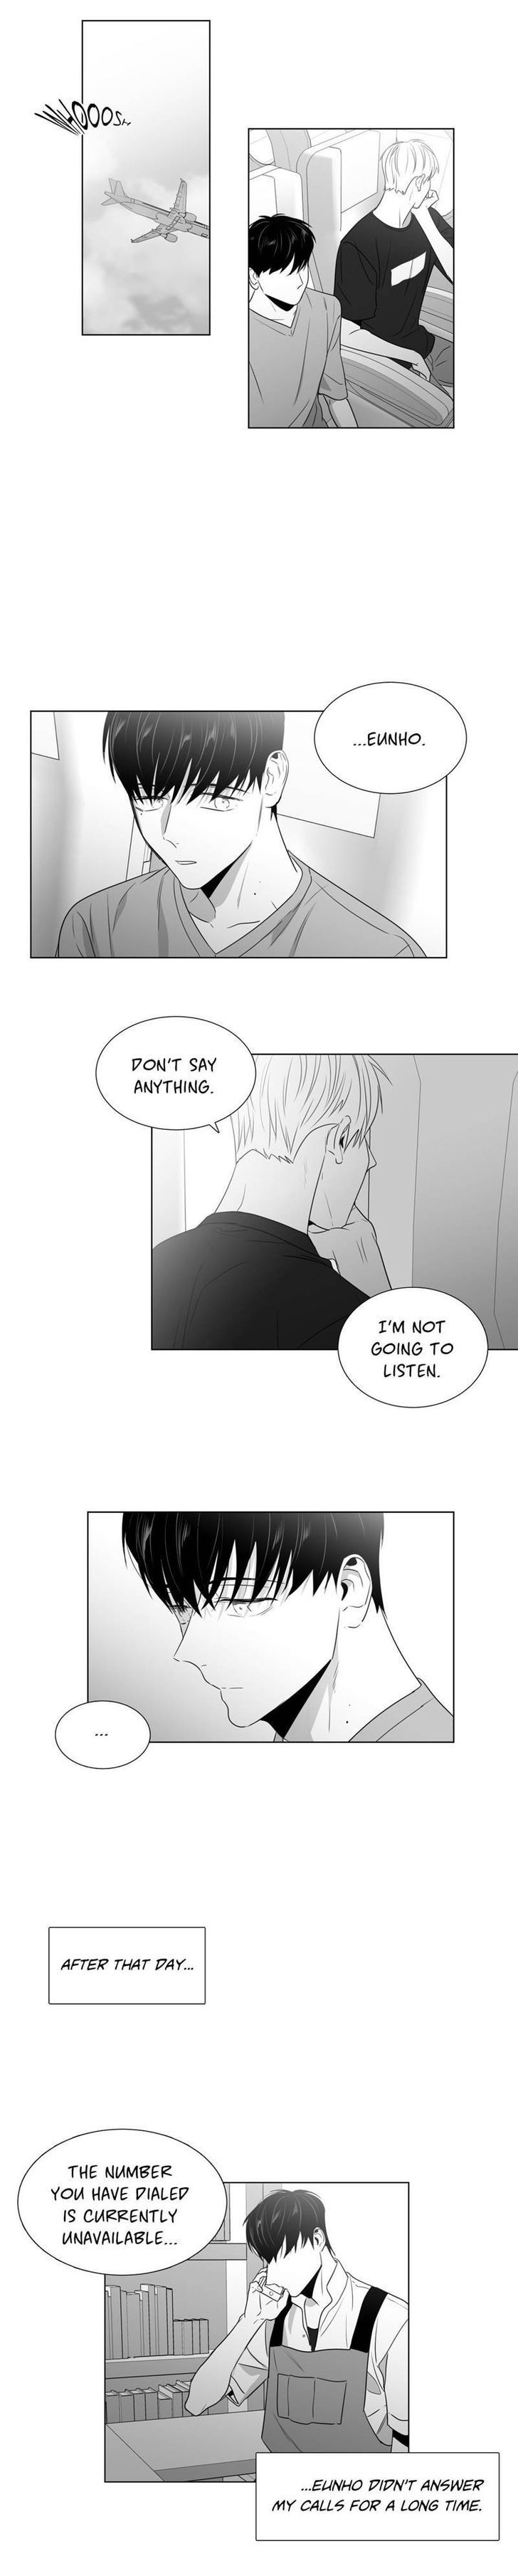 Lover Boy (Lezhin) Chapter 045 page 7